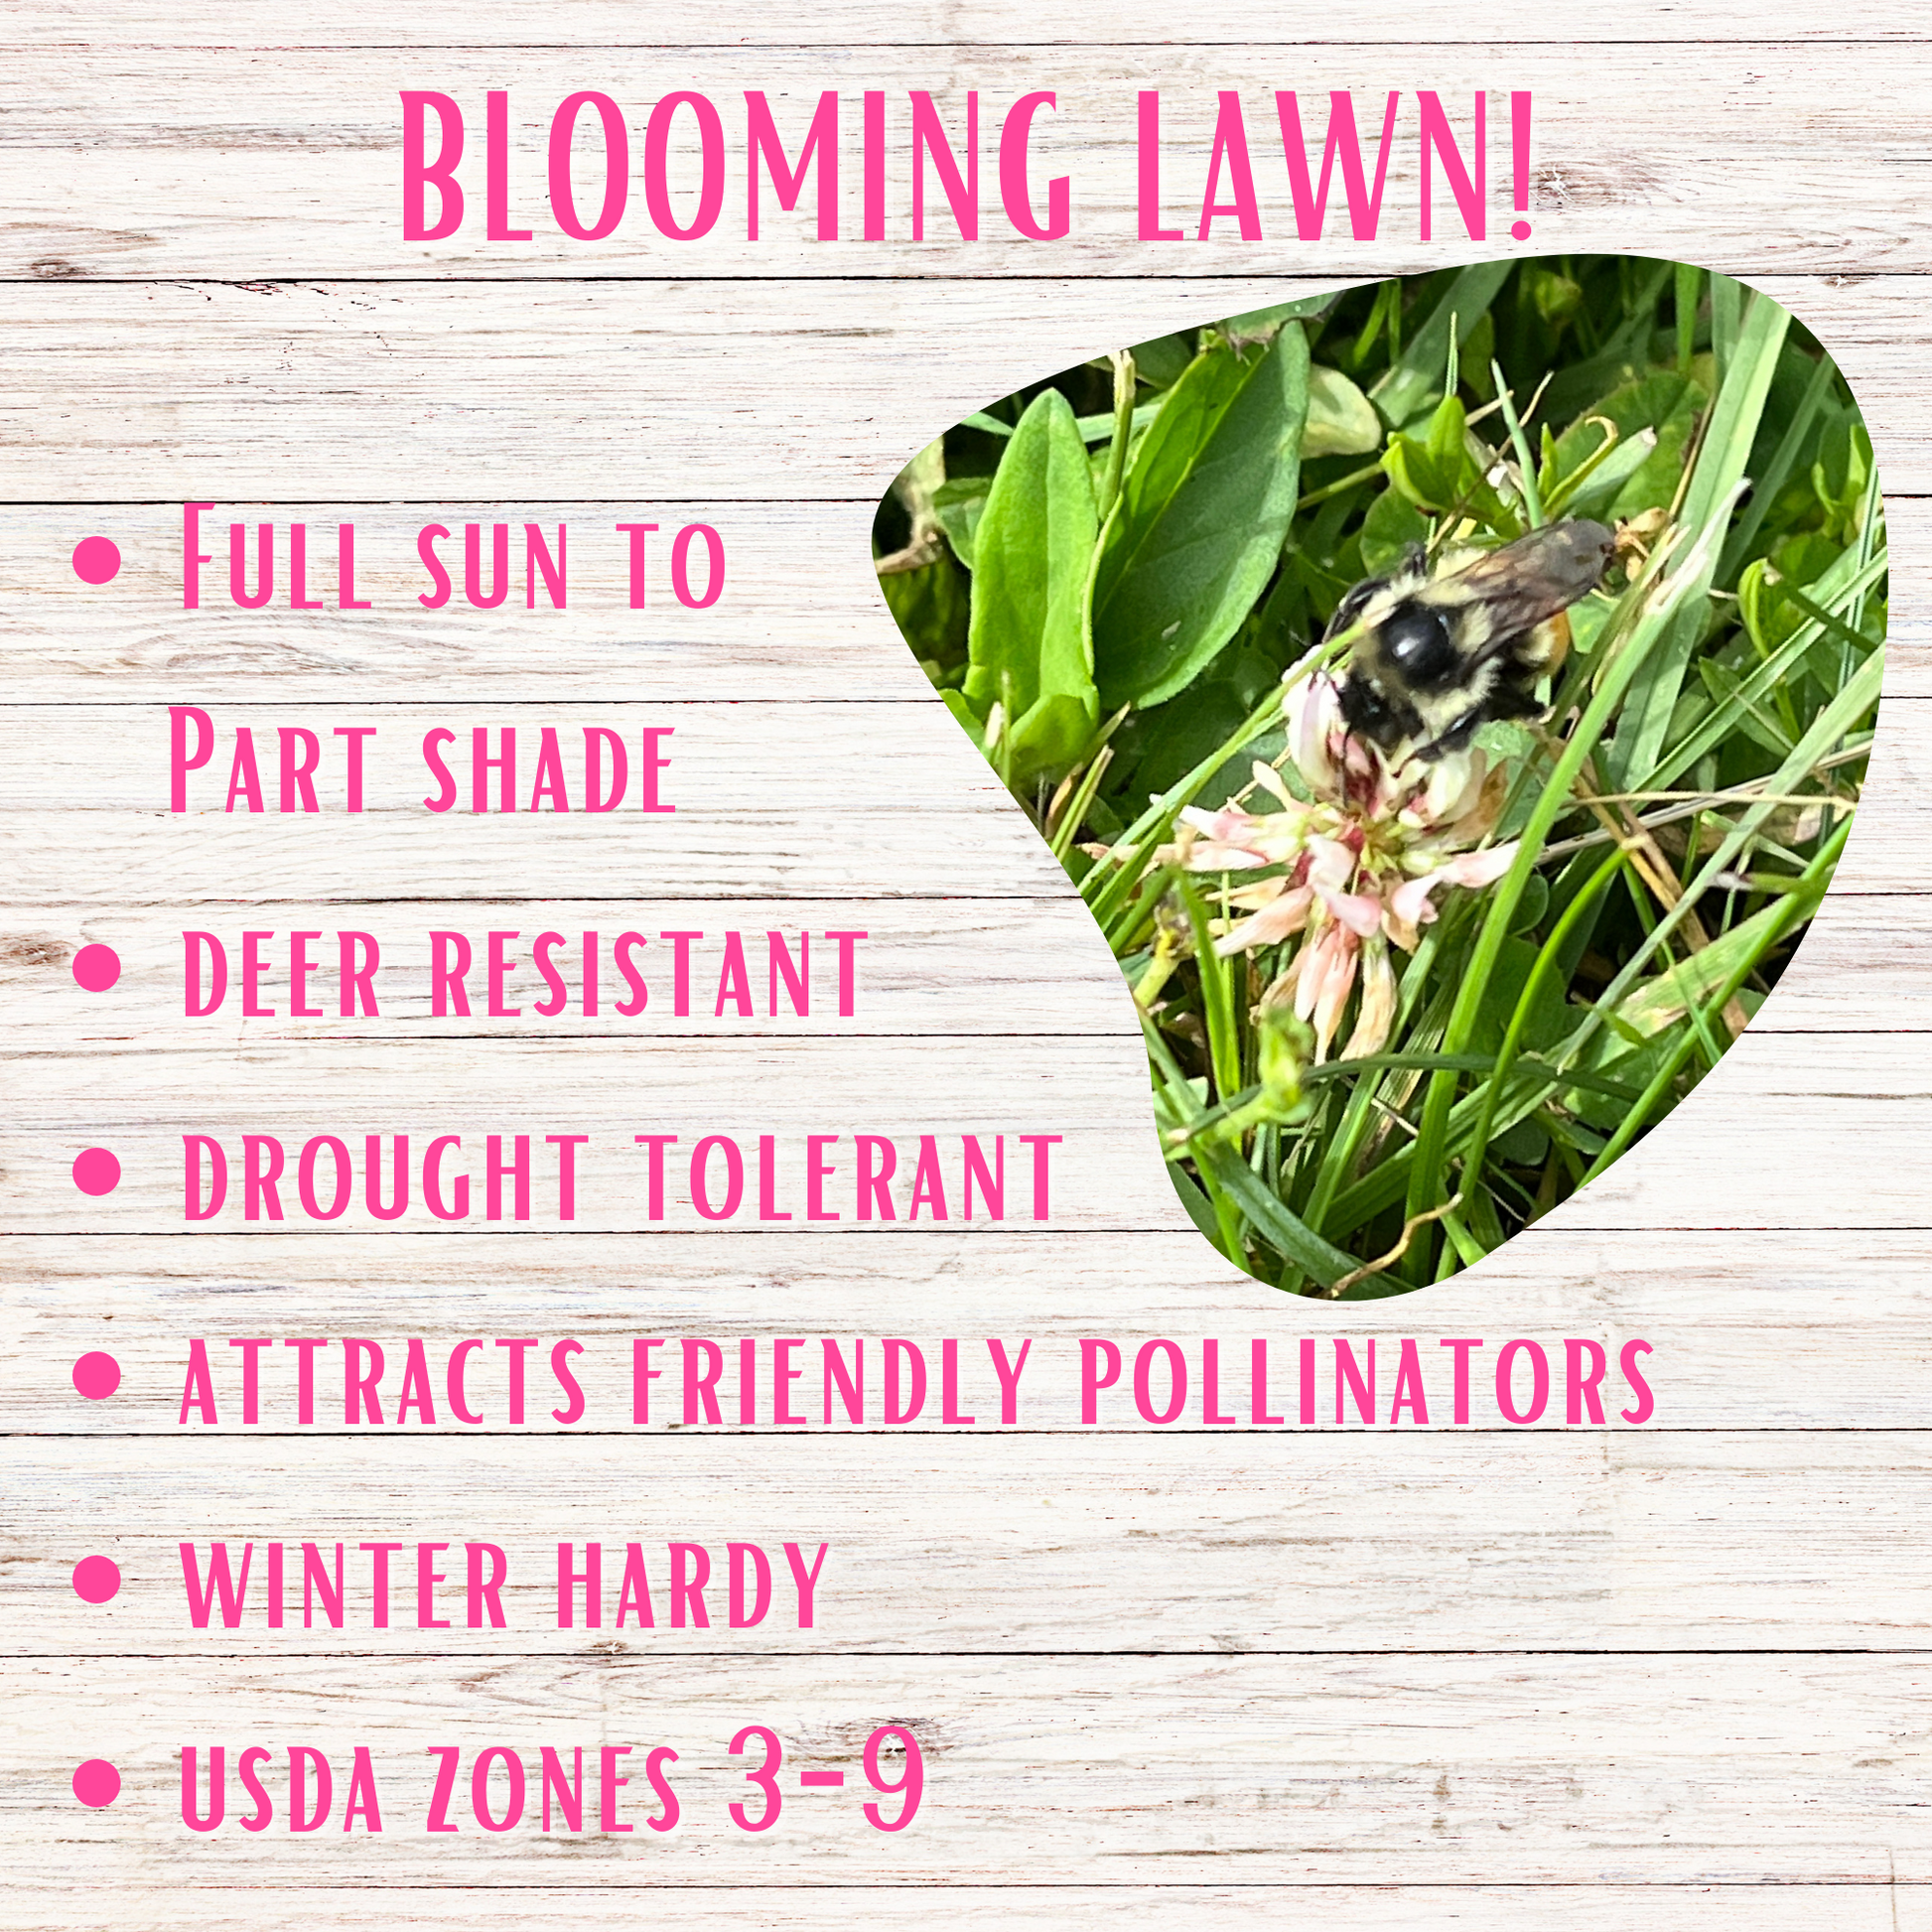 Flawn Seed Kit Blooming Pollinator Lawn, Full sun to part shade, deer resistant, drought tolerant, attracts friendly pollinators, winter hardy, USDA zones 3-9